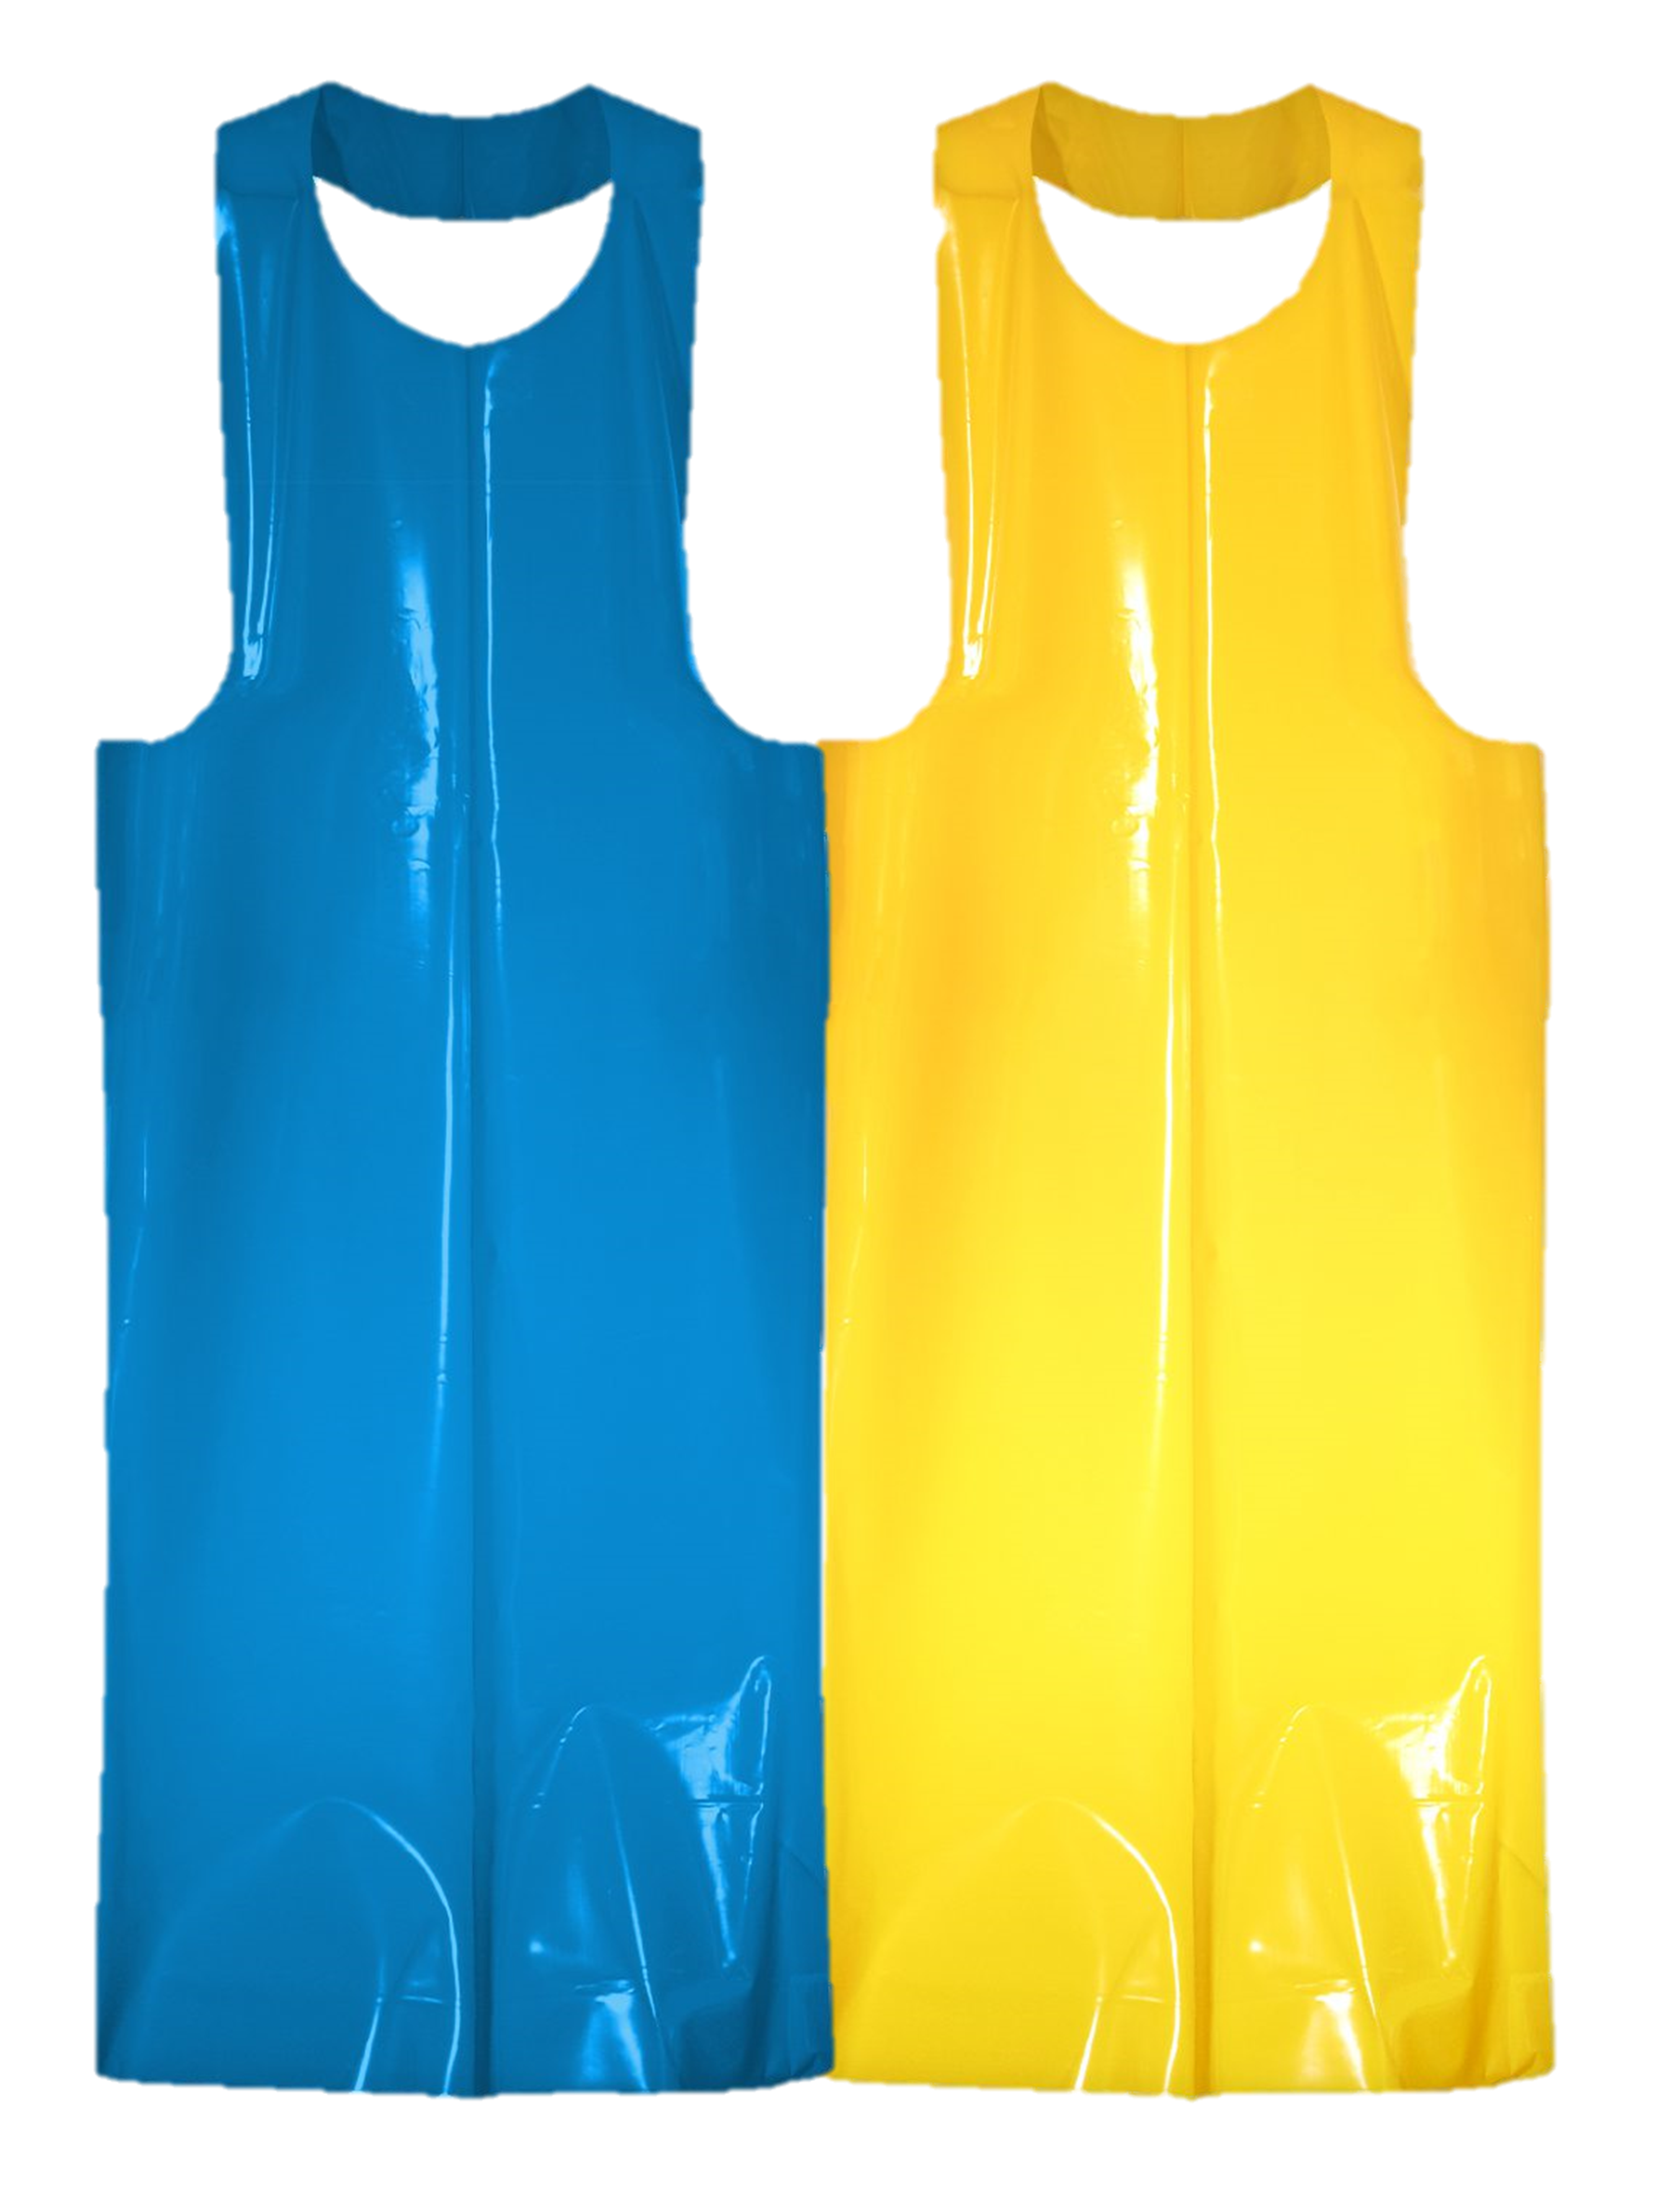 Superior® KeepKleen® Polyurethane Aprons in blue and yellow colors